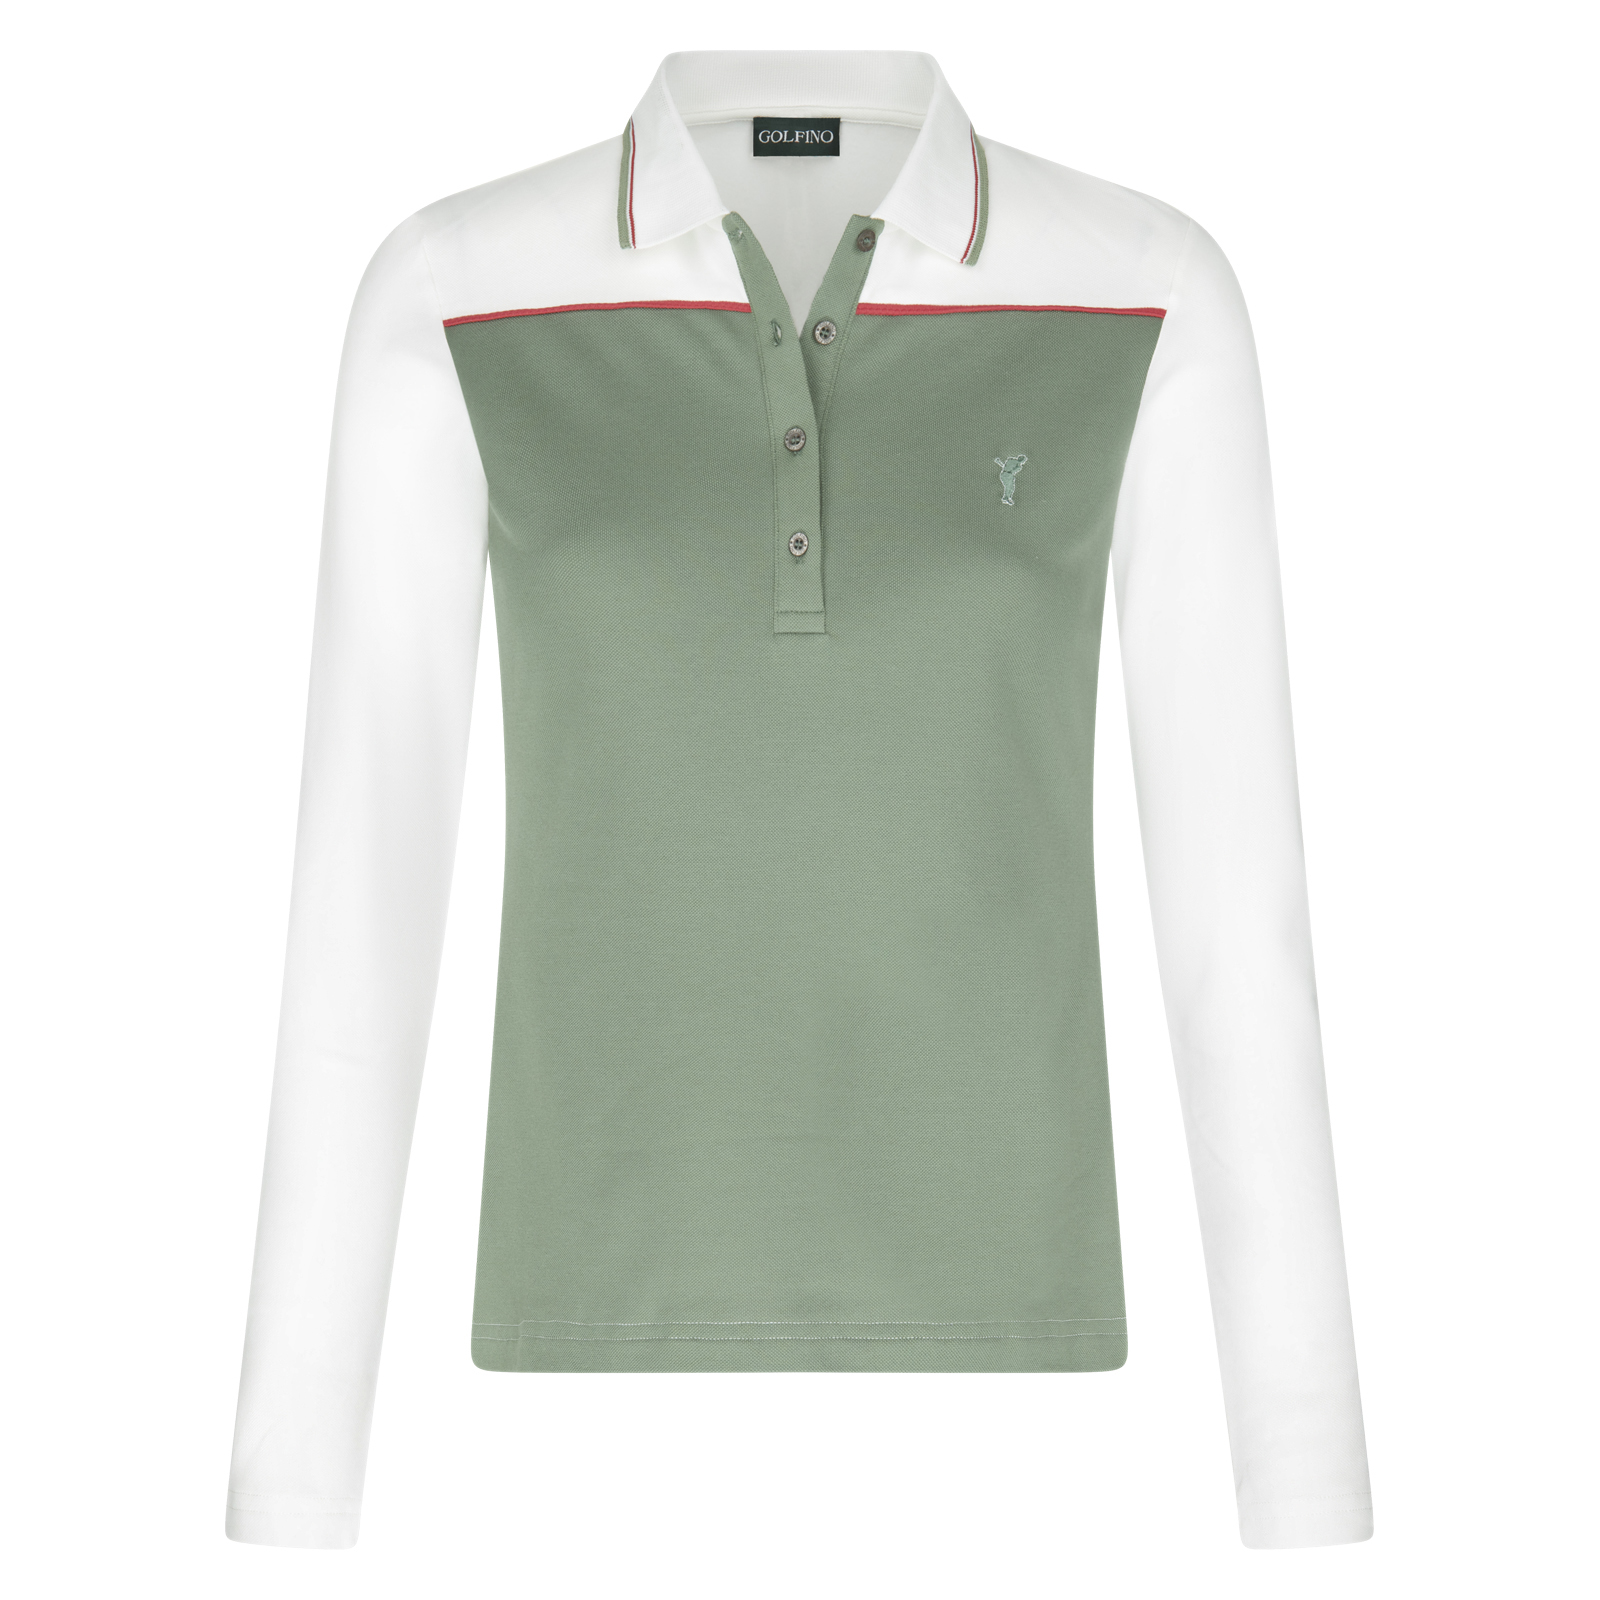 Ladies' sustainable long-sleeved polo shirt in colour blocking design